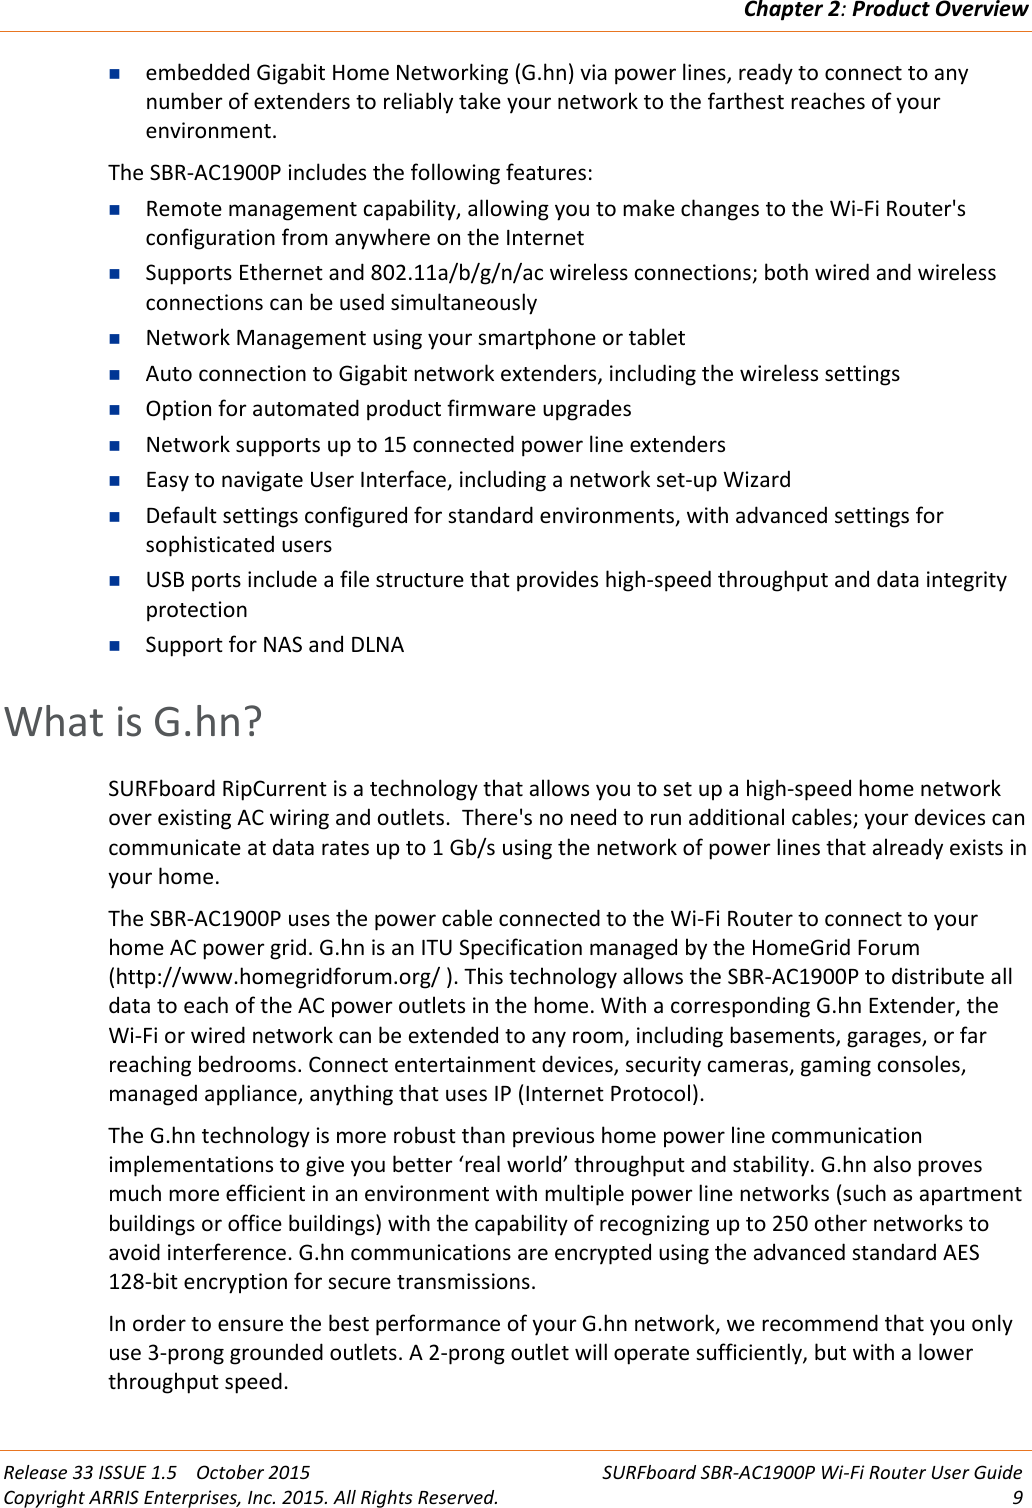 Chapter 2:Product OverviewRelease 33 ISSUE 1.5 October 2015 SURFboard SBR-AC1900P Wi-Fi Router User GuideCopyright ARRIS Enterprises, Inc. 2015. All Rights Reserved. 9embedded Gigabit Home Networking (G.hn) via power lines, ready to connect to anynumber of extenders to reliably take your network to the farthest reaches of yourenvironment.The SBR-AC1900P includes the following features:Remote management capability, allowing you to make changes to the Wi-Fi Router&apos;sconfiguration from anywhere on the InternetSupports Ethernet and 802.11a/b/g/n/ac wireless connections; both wired and wirelessconnections can be used simultaneouslyNetwork Management using your smartphone or tabletAuto connection to Gigabit network extenders, including the wireless settingsOption for automated product firmware upgradesNetwork supports up to 15 connected power line extendersEasy to navigate User Interface, including a network set-up WizardDefault settings configured for standard environments, with advanced settings forsophisticated usersUSB ports include a file structure that provides high-speed throughput and data integrityprotectionSupport for NAS and DLNAWhat is G.hn?SURFboard RipCurrent is a technology that allows you to set up a high-speed home networkover existing AC wiring and outlets. There&apos;s no need to run additional cables; your devices cancommunicate at data rates up to 1 Gb/s using the network of power lines that already exists inyour home.The SBR-AC1900P uses the power cable connected to the Wi-Fi Router to connect to yourhome AC power grid. G.hn is an ITU Specification managed by the HomeGrid Forum(http://www.homegridforum.org/ ). This technology allows the SBR-AC1900P to distribute alldata to each of the AC power outlets in the home. With a corresponding G.hn Extender, theWi-Fi or wired network can be extended to any room, including basements, garages, or farreaching bedrooms. Connect entertainment devices, security cameras, gaming consoles,managed appliance, anything that uses IP (Internet Protocol).The G.hn technology is more robust than previous home power line communicationimplementations to give you better ‘real world’ throughput and stability. G.hn also provesmuch more efficient in an environment with multiple power line networks (such as apartmentbuildings or office buildings) with the capability of recognizing up to 250 other networks toavoid interference. G.hn communications are encrypted using the advanced standard AES128-bit encryption for secure transmissions.In order to ensure the best performance of your G.hn network, we recommend that you onlyuse 3-prong grounded outlets. A 2-prong outlet will operate sufficiently, but with a lowerthroughput speed.